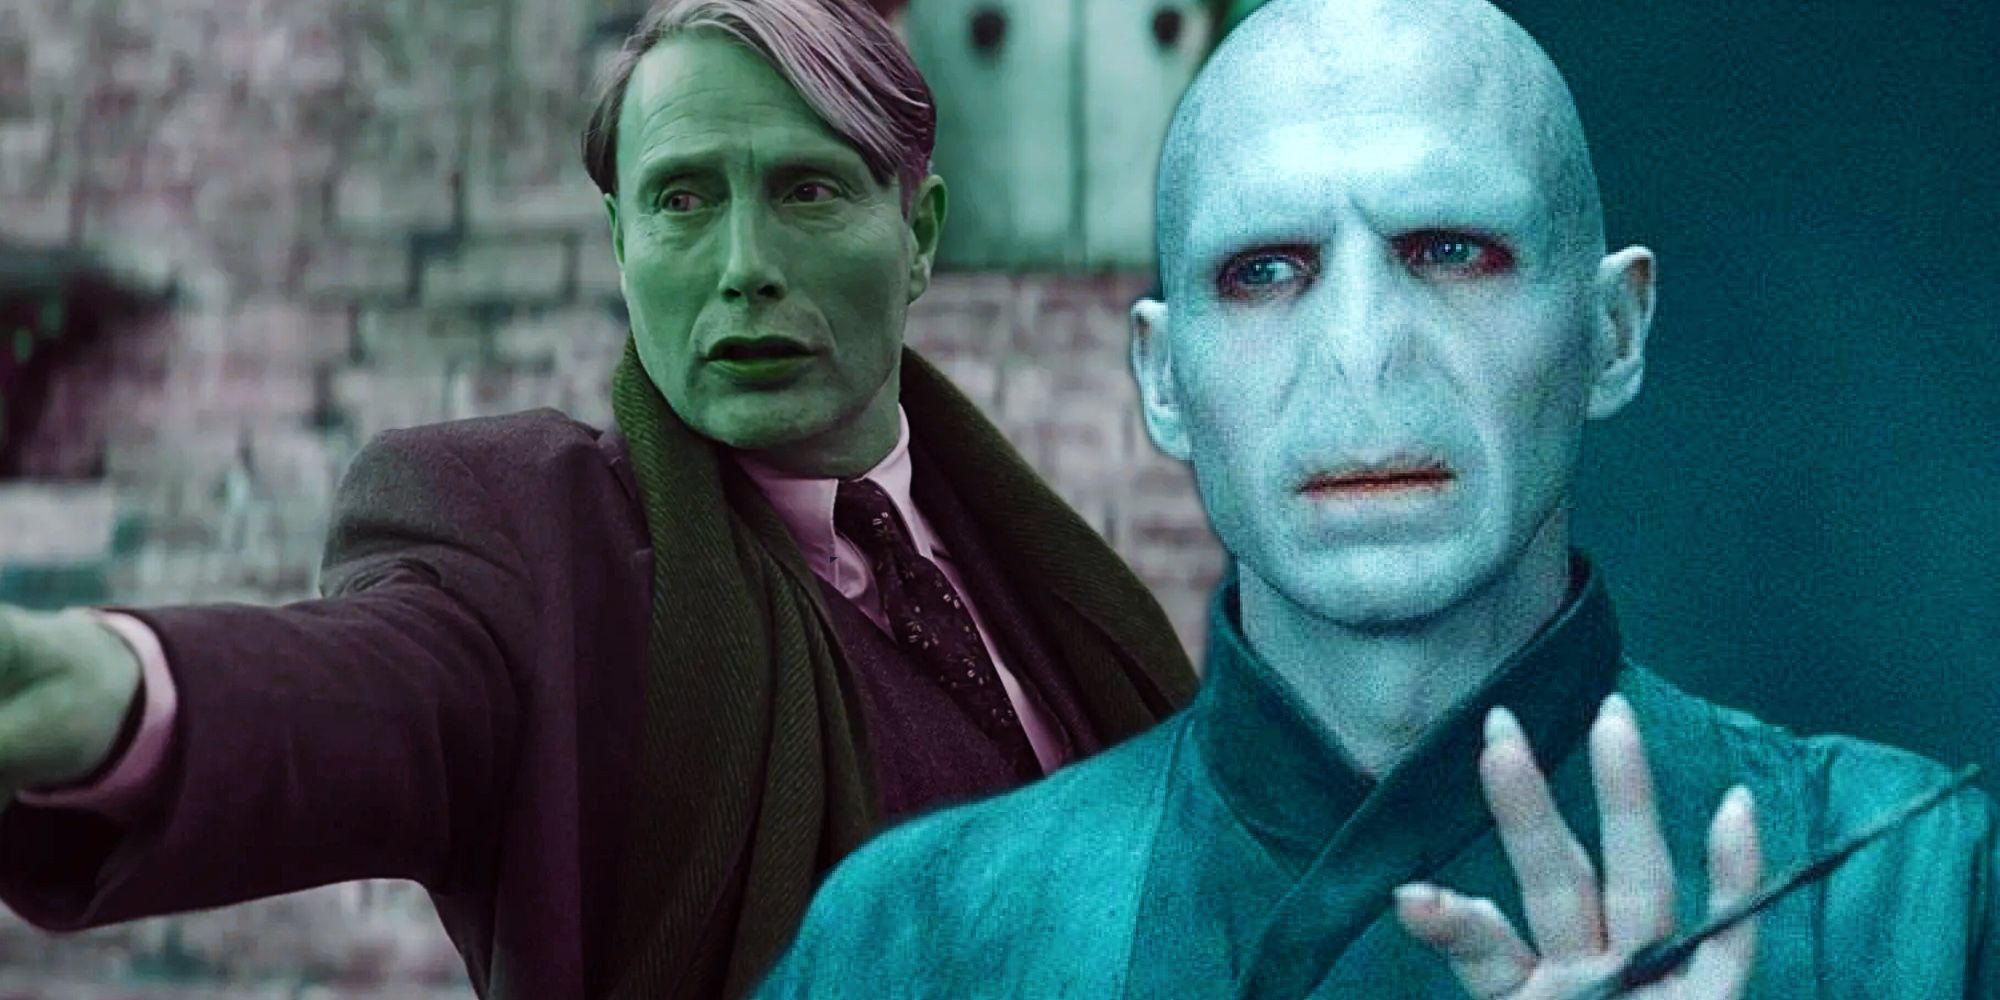 fantastic beasts 4 can fix harry potter's weird grindelwald retcon